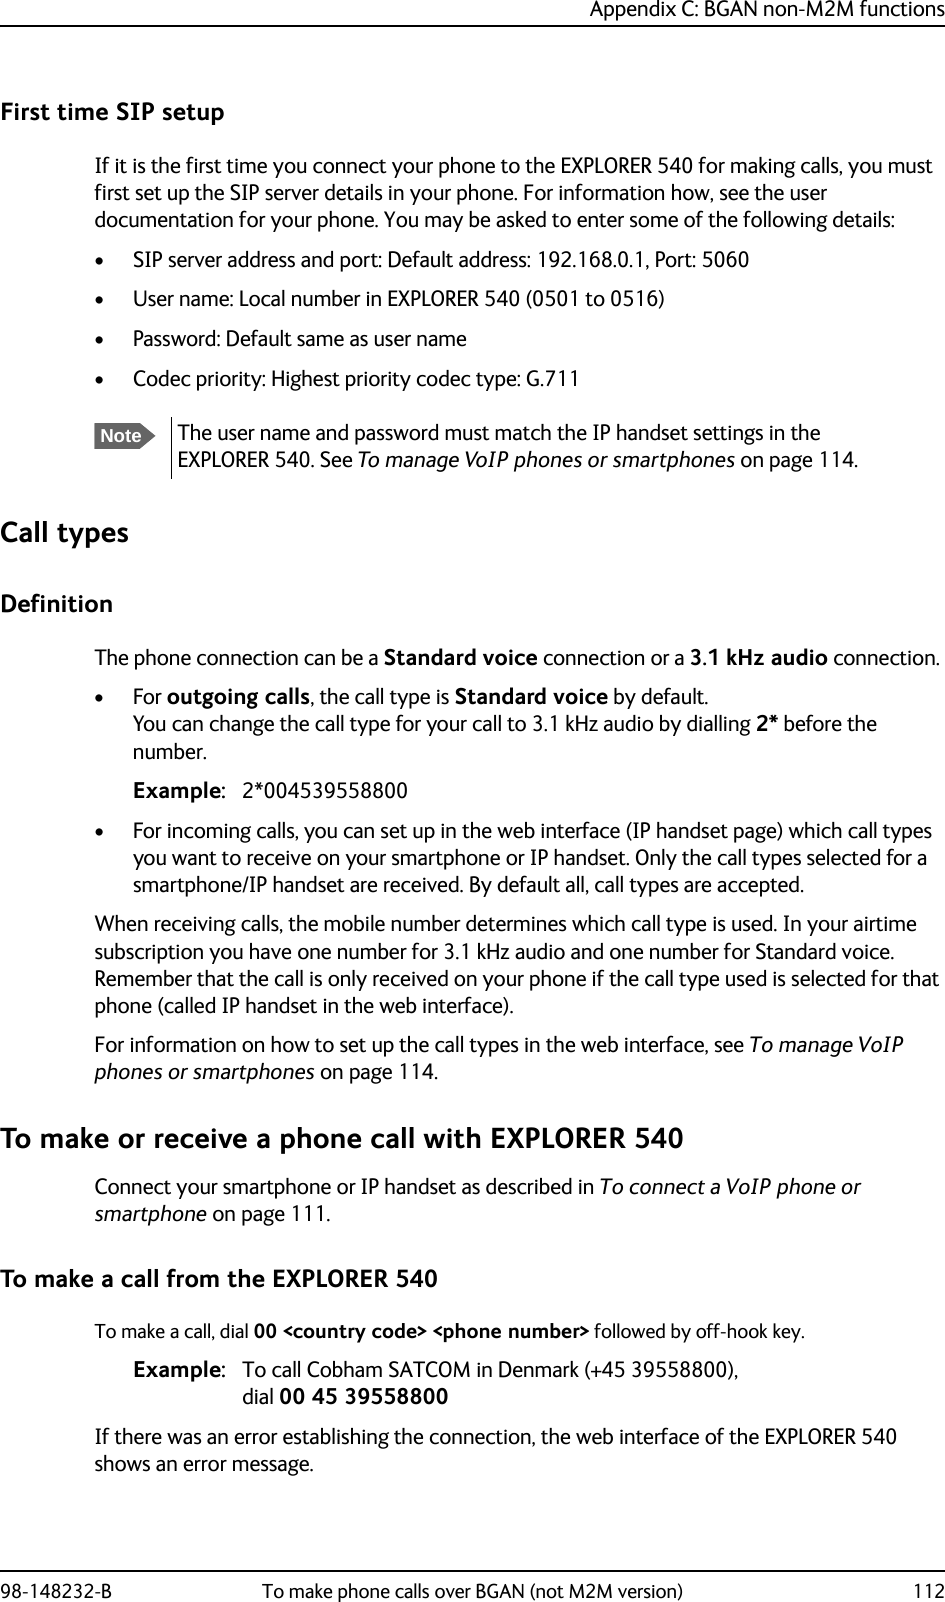 Appendix C: BGAN non-M2M functions98-148232-B To make phone calls over BGAN (not M2M version) 112First time SIP setupIf it is the first time you connect your phone to the EXPLORER 540 for making calls, you must first set up the SIP server details in your phone. For information how, see the user documentation for your phone. You may be asked to enter some of the following details:• SIP server address and port: Default address: 192.168.0.1, Port: 5060• User name: Local number in EXPLORER 540 (0501 to 0516)• Password: Default same as user name• Codec priority: Highest priority codec type: G.711Call typesDefinitionThe phone connection can be a Standard voice connection or a 3.1 kHz audio connection. •For outgoing calls, the call type is Standard voice by default. You can change the call type for your call to 3.1 kHz audio by dialling 2* before the number.Example: 2*004539558800• For incoming calls, you can set up in the web interface (IP handset page) which call types you want to receive on your smartphone or IP handset. Only the call types selected for a smartphone/IP handset are received. By default all, call types are accepted.When receiving calls, the mobile number determines which call type is used. In your airtime subscription you have one number for 3.1 kHz audio and one number for Standard voice. Remember that the call is only received on your phone if the call type used is selected for that phone (called IP handset in the web interface).For information on how to set up the call types in the web interface, see To manage VoIP phones or smartphones on page 114.To make or receive a phone call with EXPLORER 540Connect your smartphone or IP handset as described in To connect a VoIP phone or smartphone on page 111.To make a call from the EXPLORER 540To make a call, dial 00 &lt;country code&gt; &lt;phone number&gt; followed by off-hook key.Example: To call Cobham SATCOM in Denmark (+45 39558800), dial 00 45 39558800If there was an error establishing the connection, the web interface of the EXPLORER 540 shows an error message.NoteThe user name and password must match the IP handset settings in the EXPLORER 540. See To manage VoIP phones or smartphones on page 114.